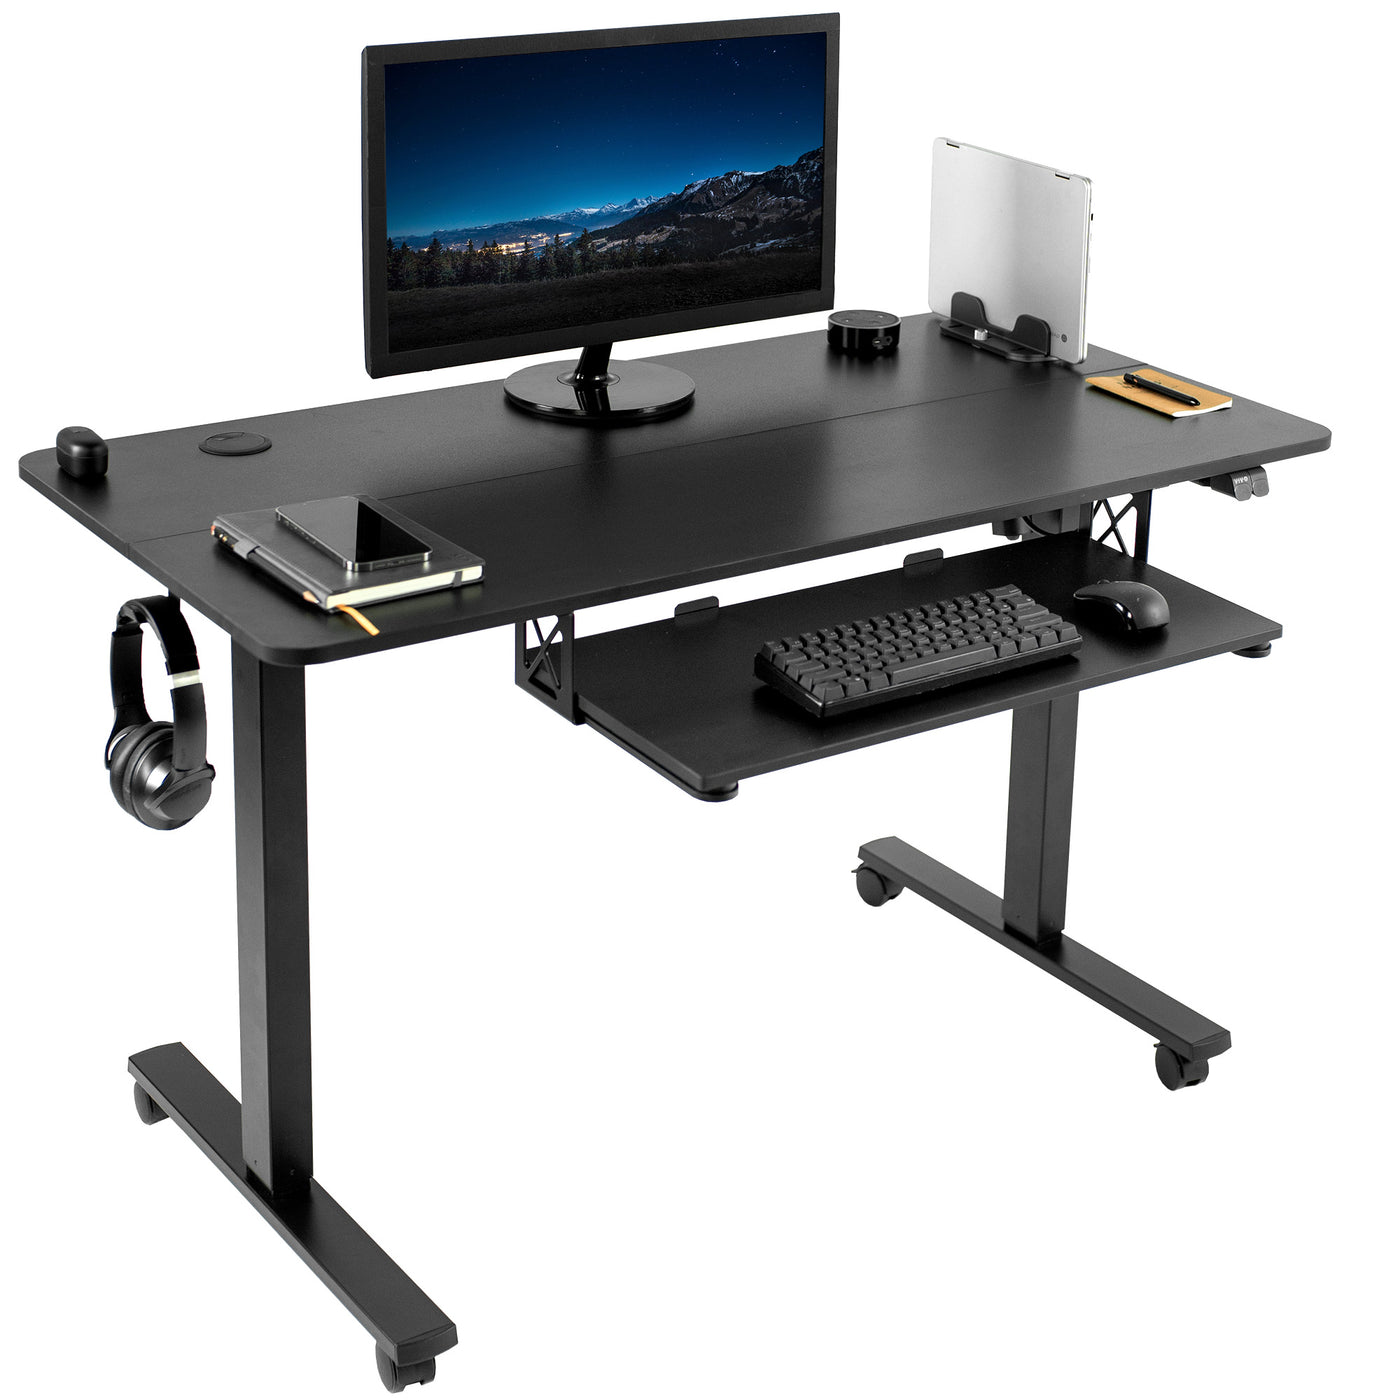 Mobile electric height adjustable desk with wheels. 